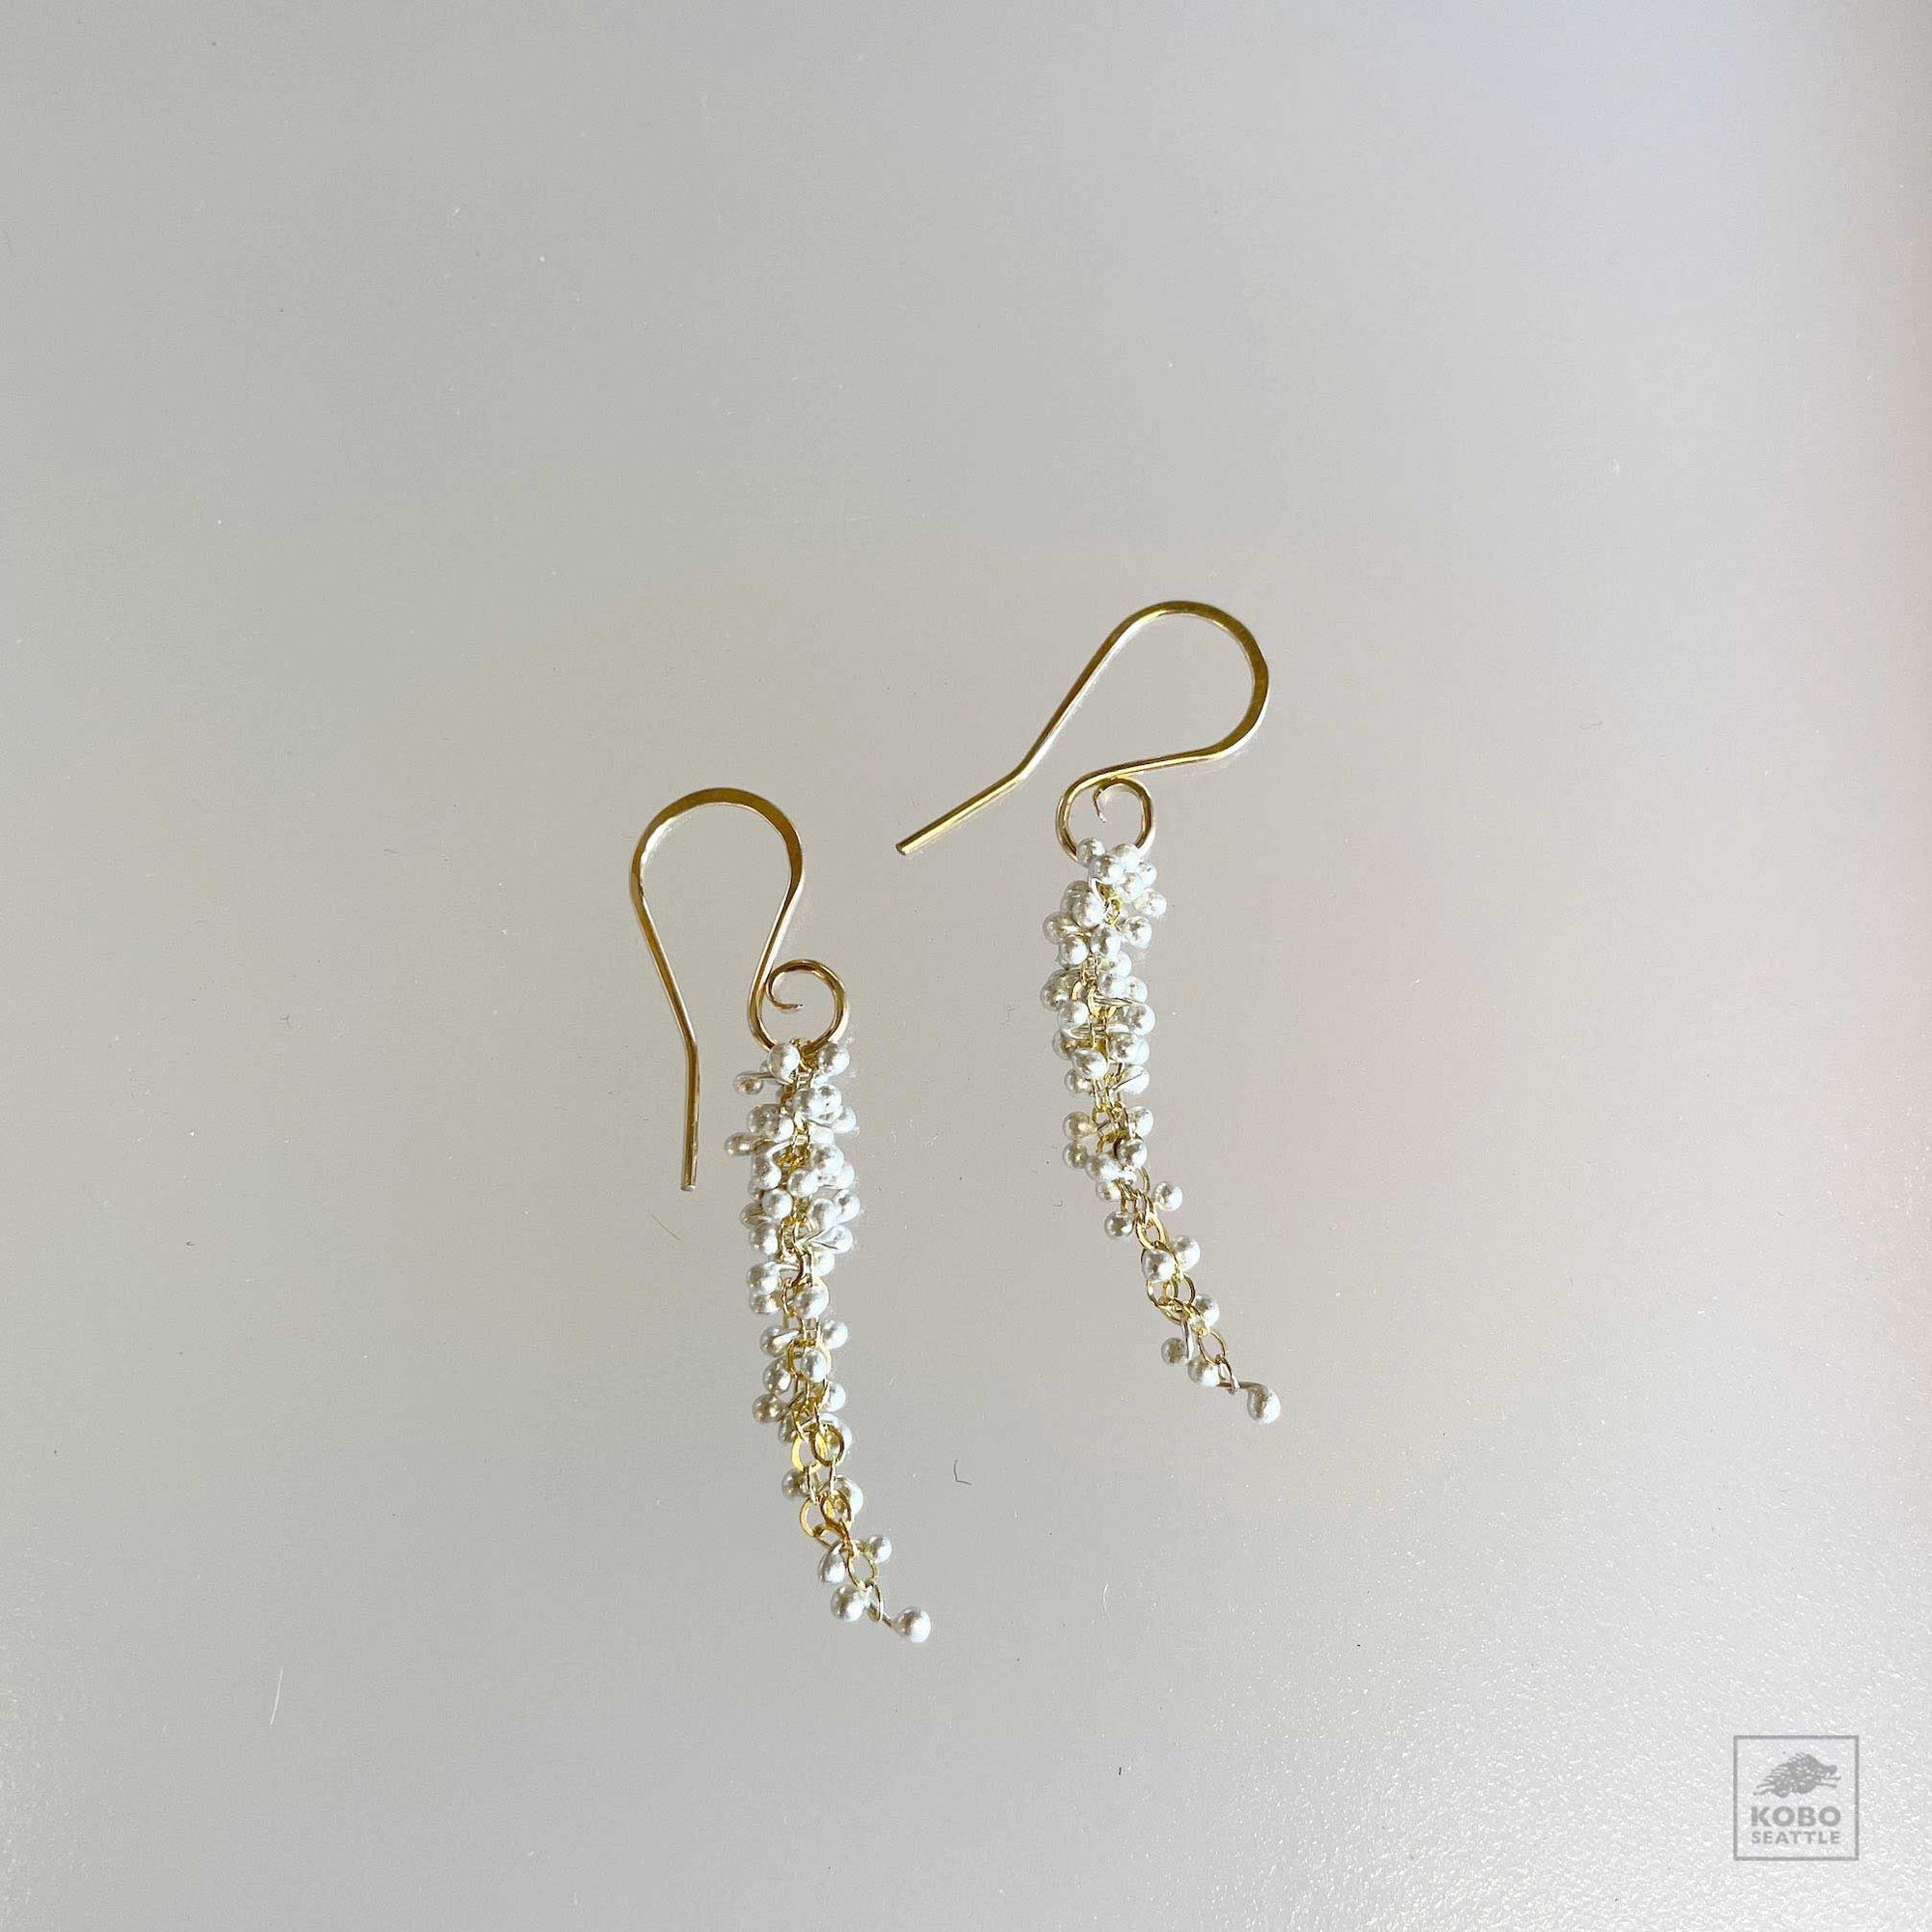 Wisteria Caviar Earrings - Sterling Silver and Gold Fill